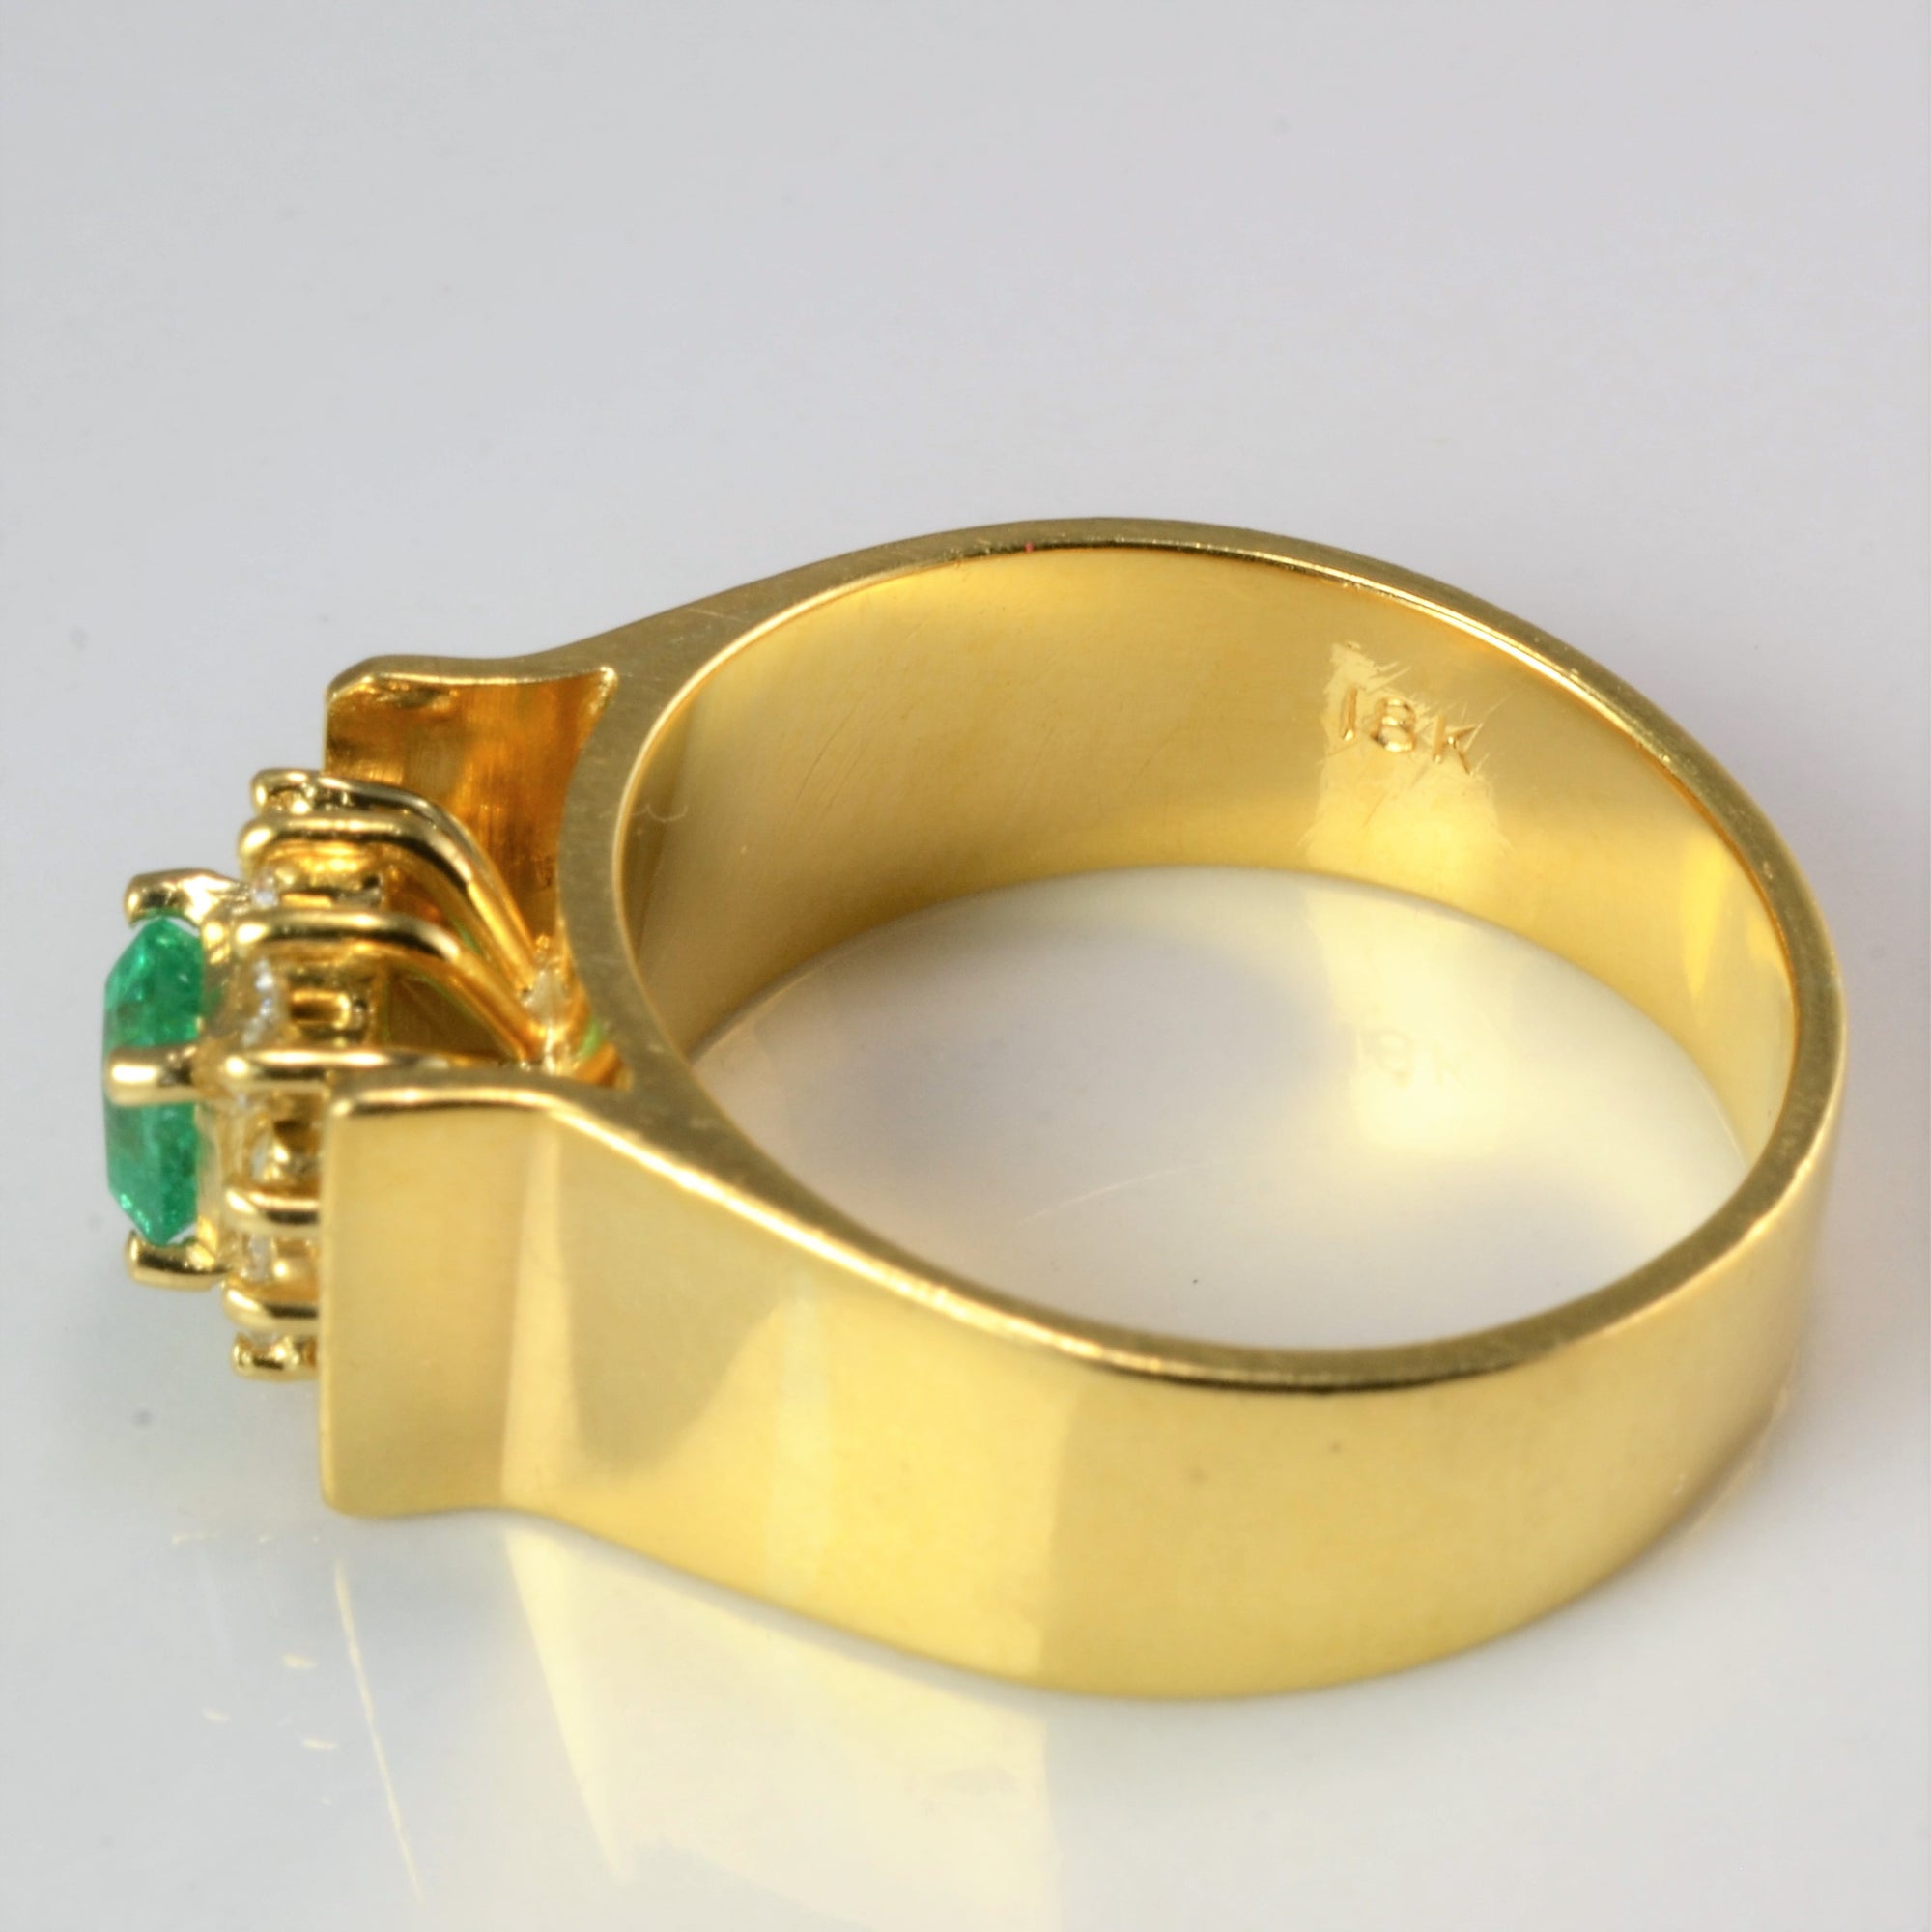 Tapered Emerald & Diamond Cocktail Ring | 0.12 ctw, SZ 6.5 |